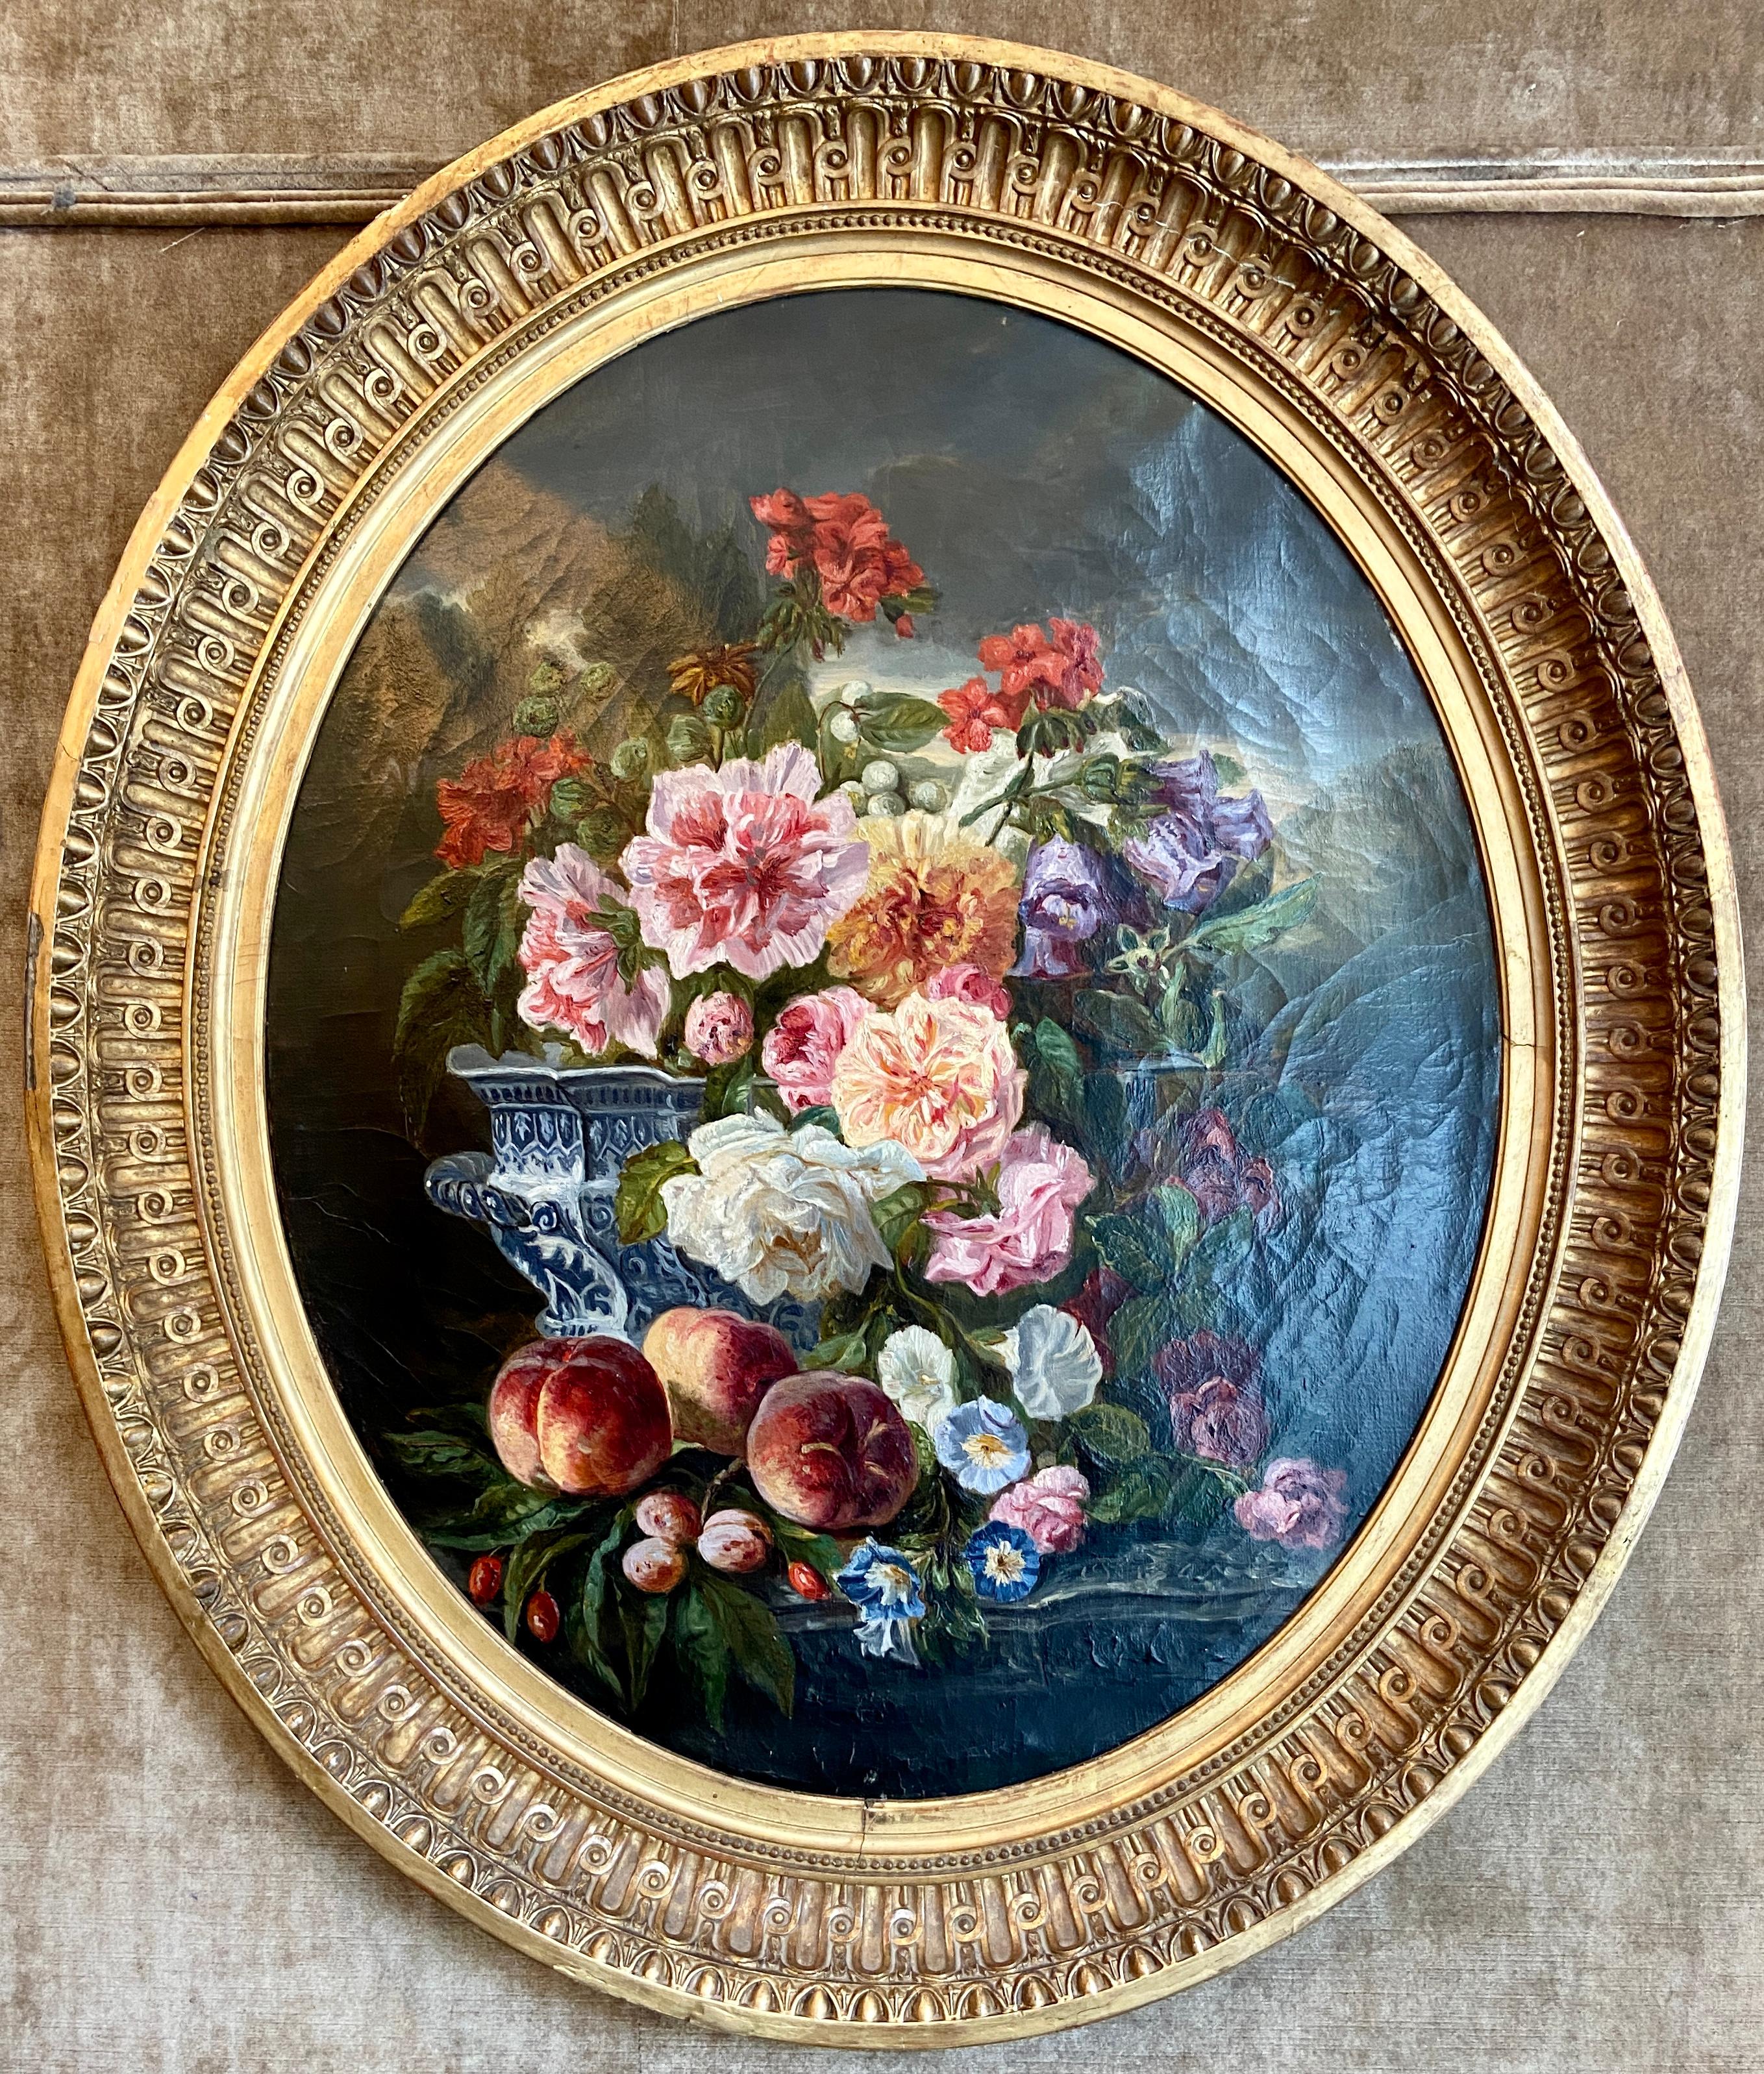 Pair Antique 19th Century French Framed Oil on Canvas Floral Paintings, Circa 1830-1860.